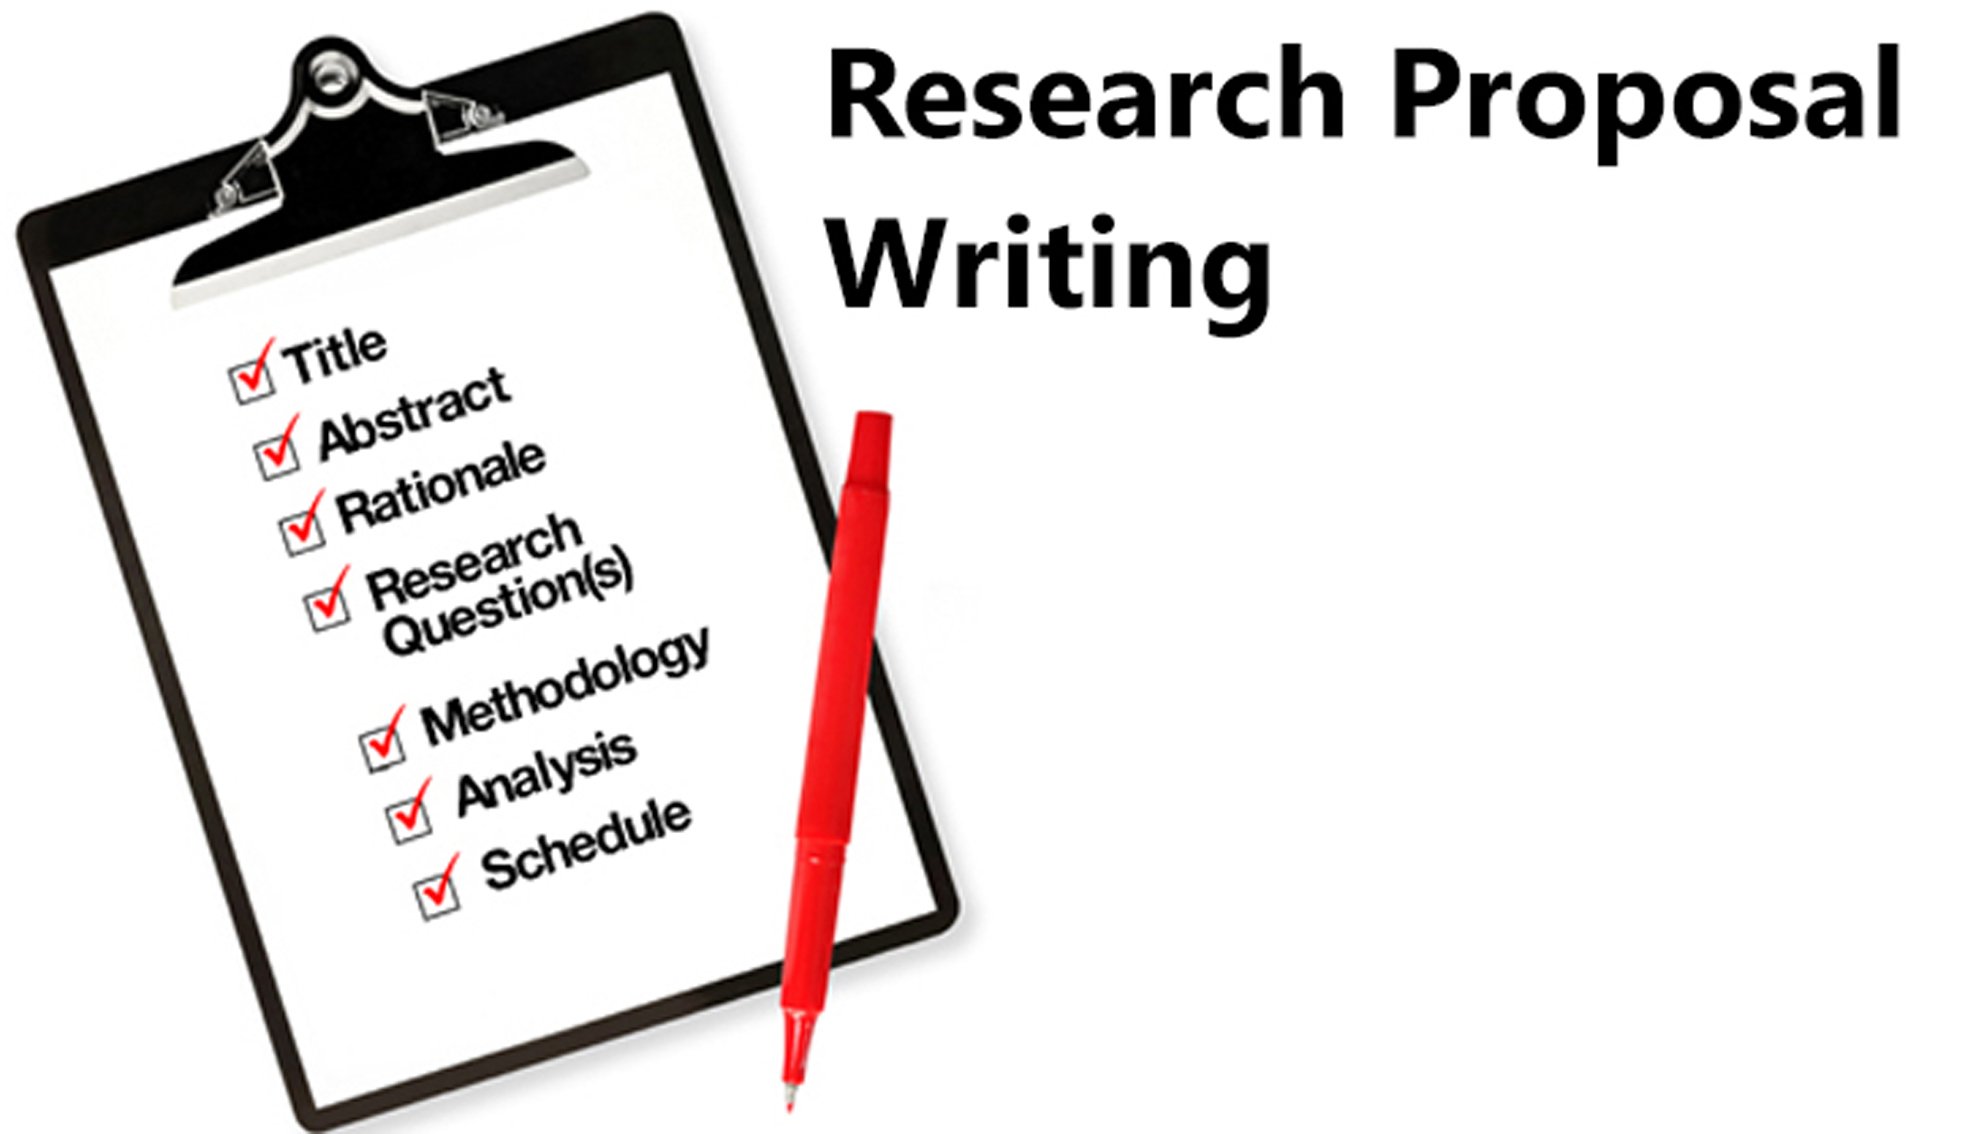 Grant research writing services